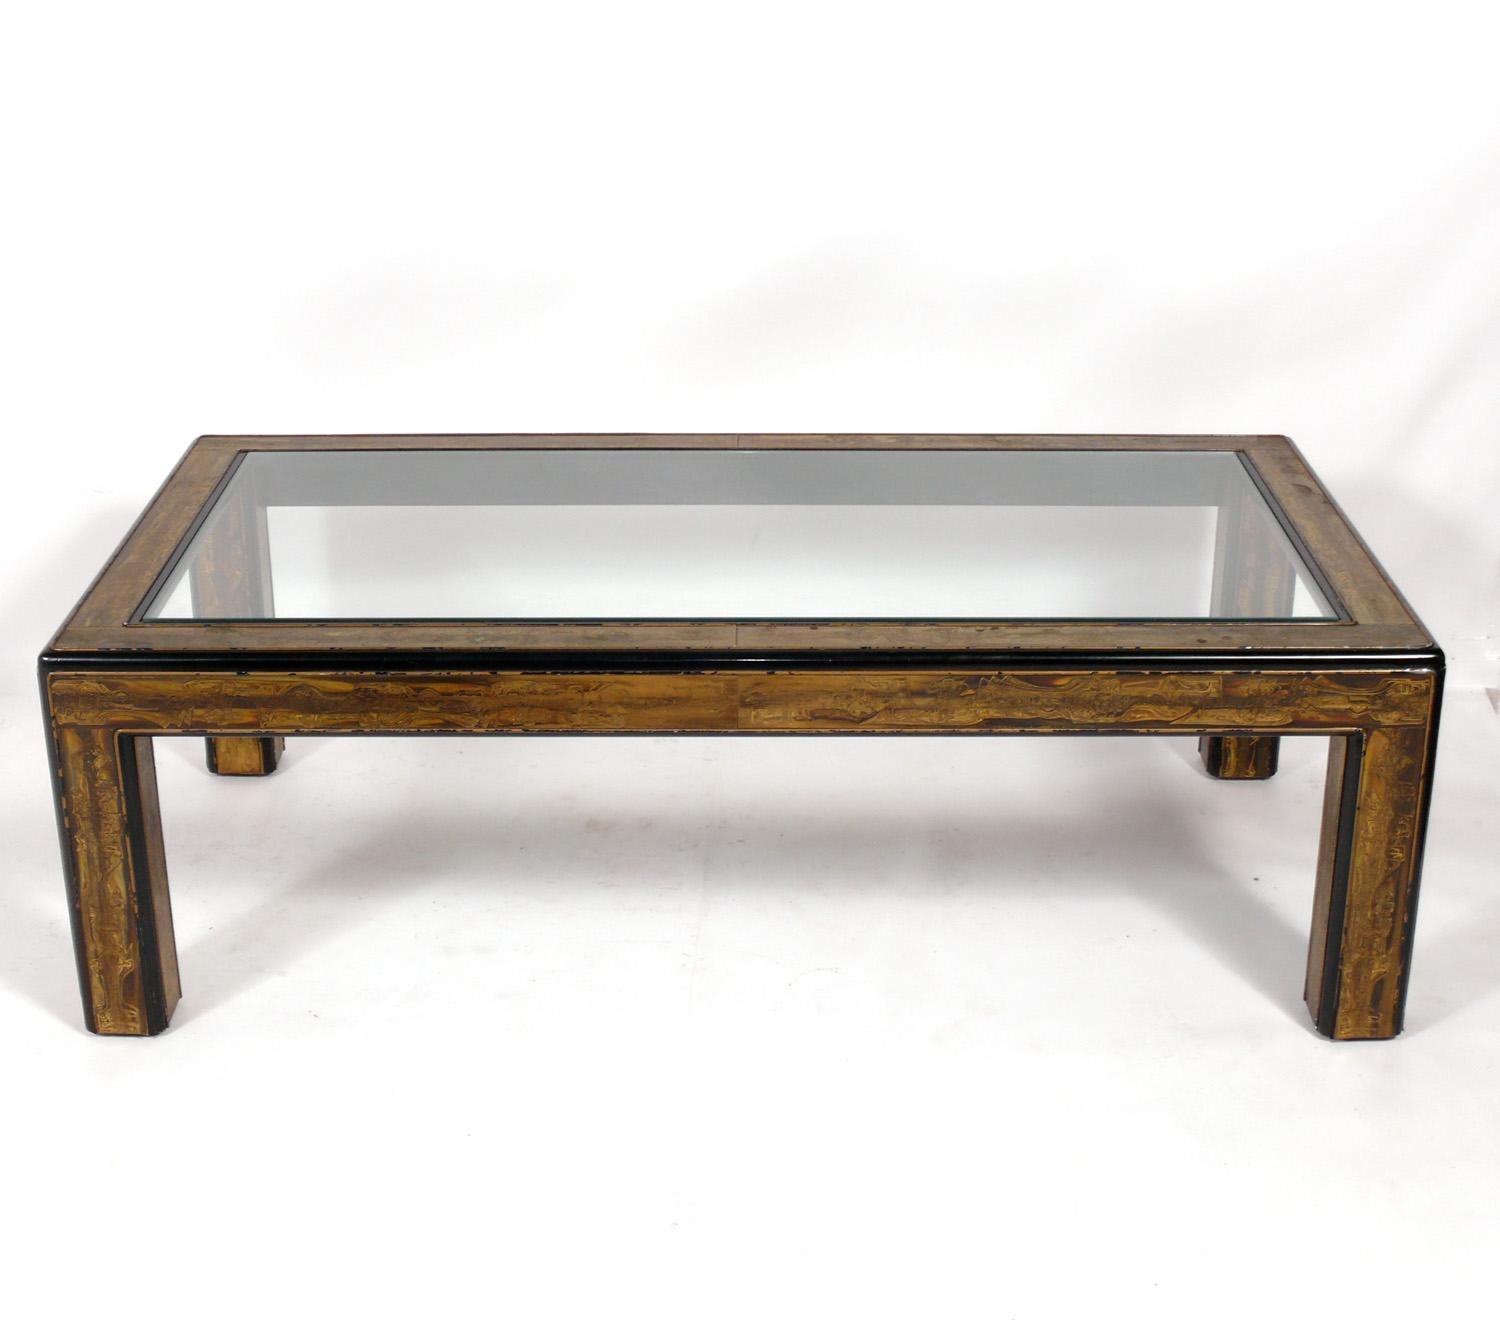 Elegant Etched brass large scale coffee table, designed by Bernhard Rohne for Mastercraft, American, circa 1960s. This table measures an impressive 55